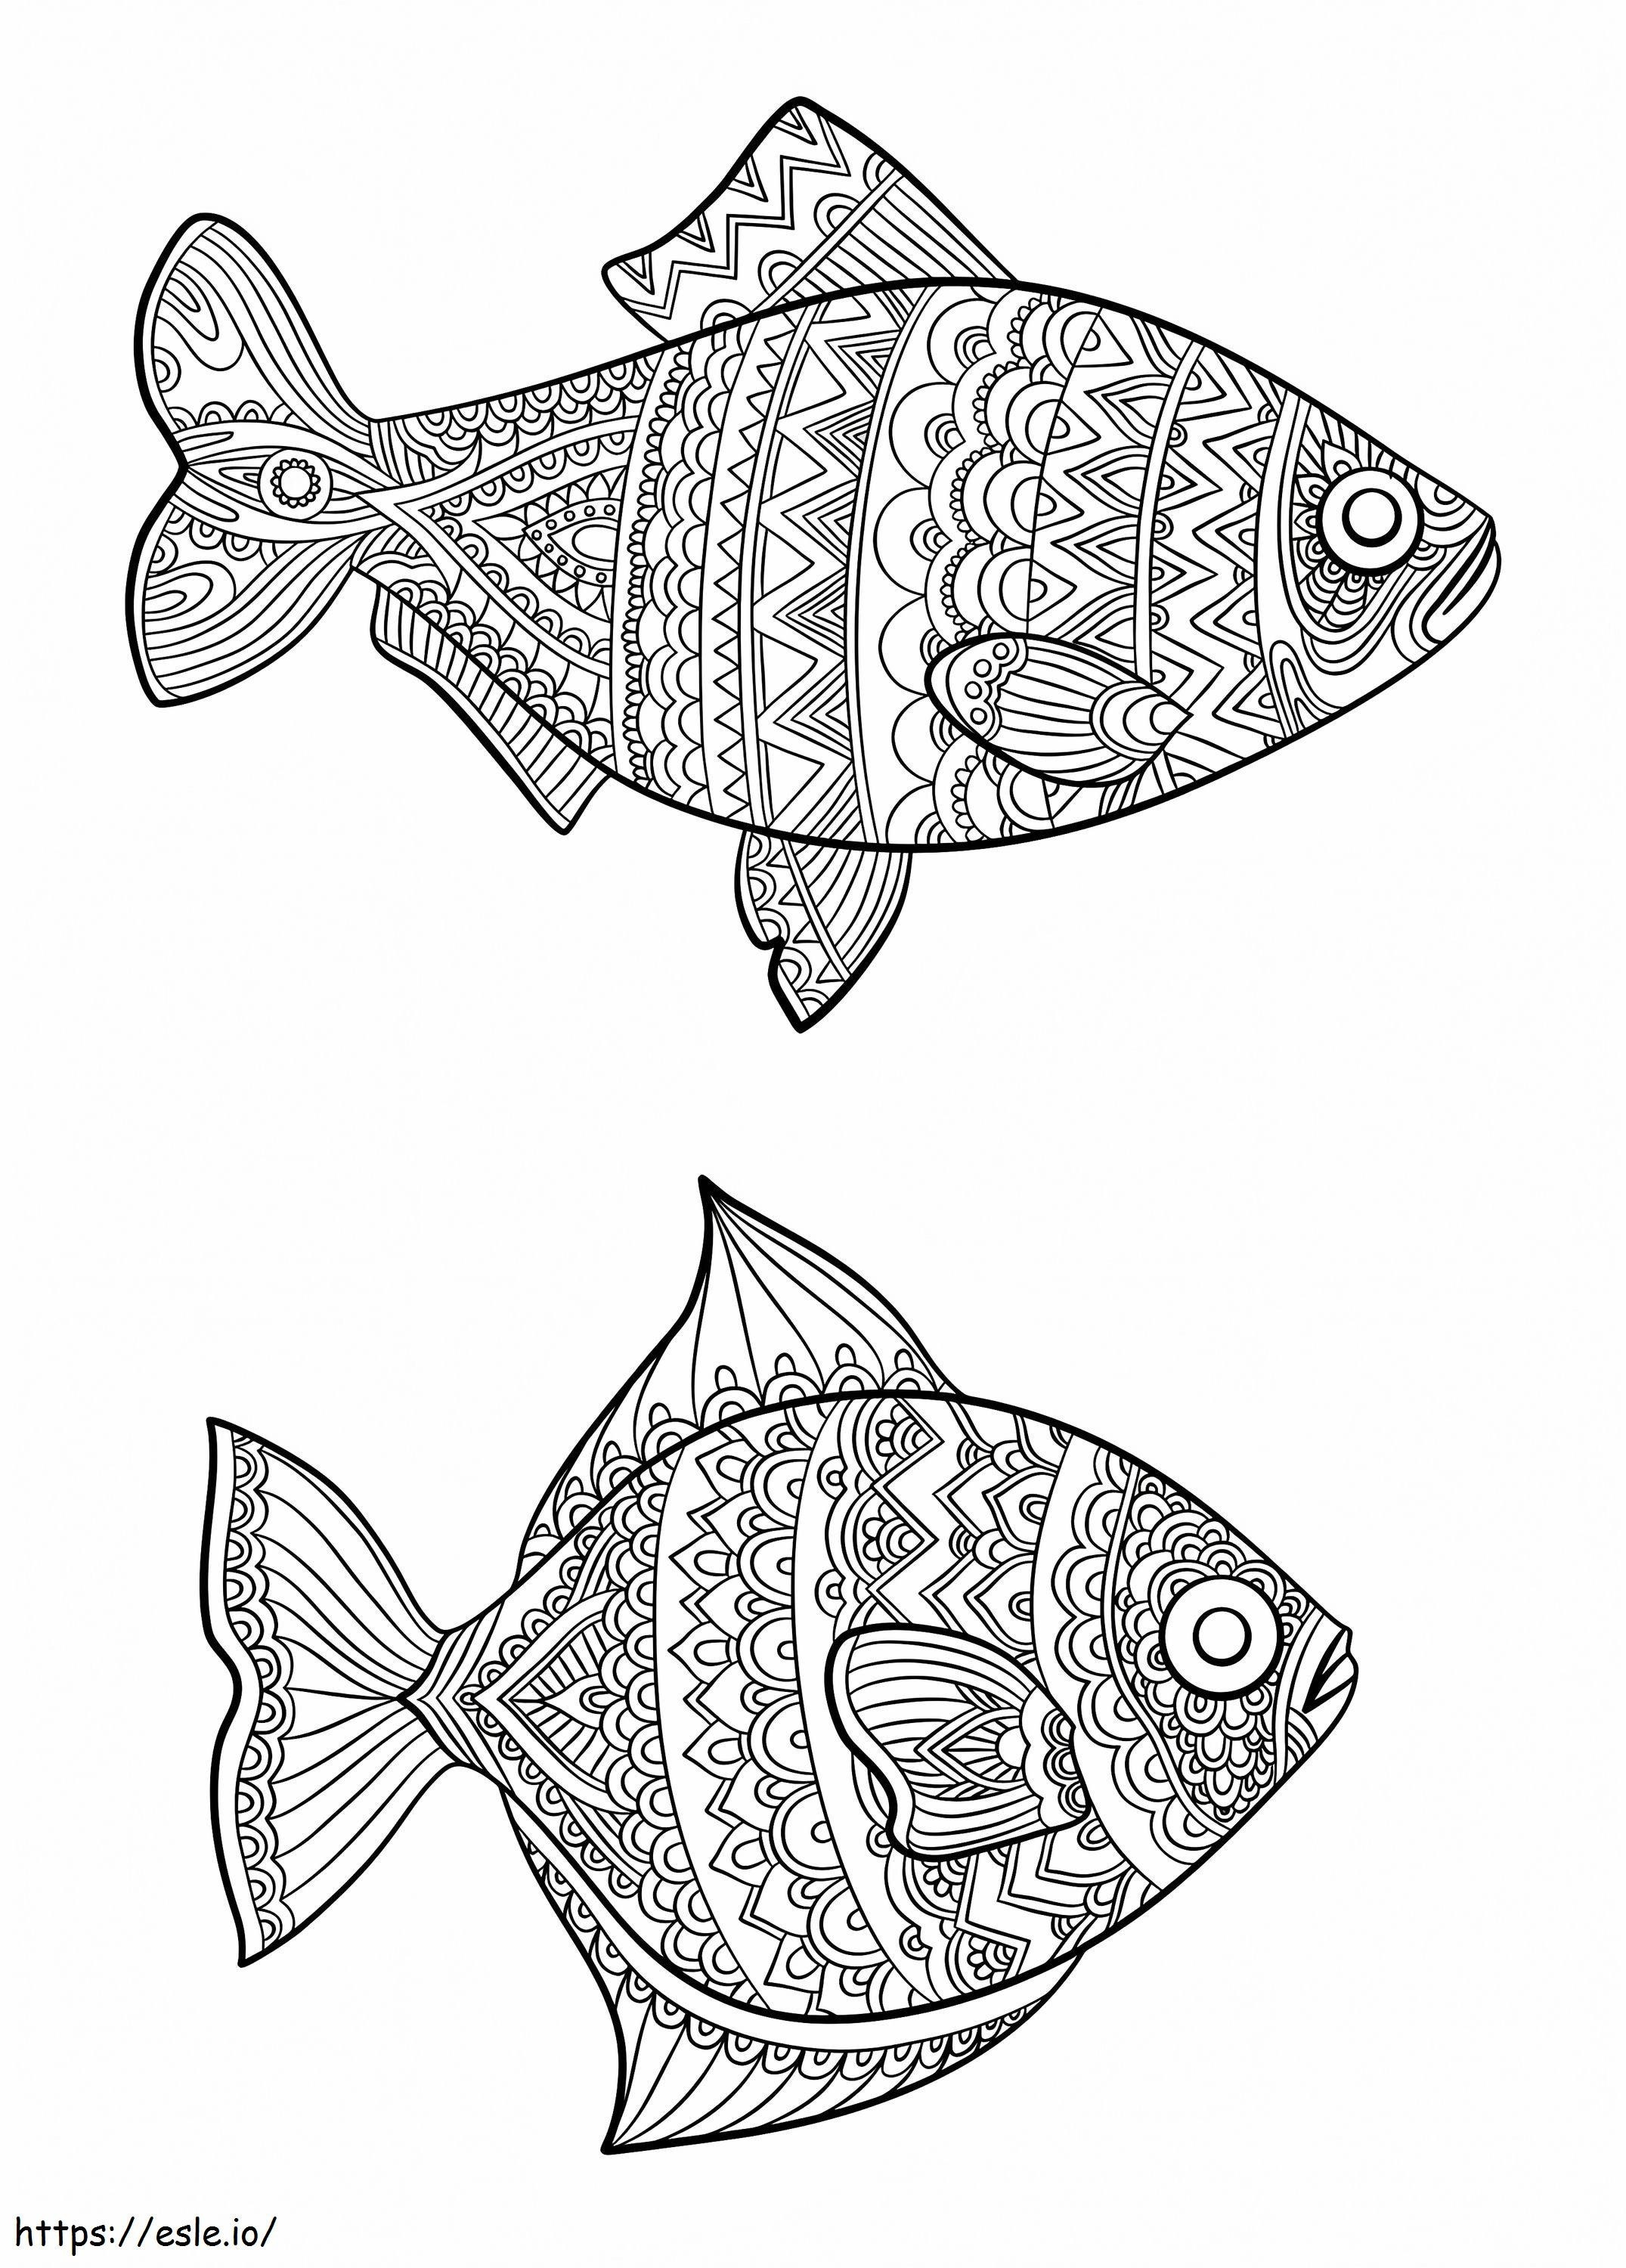 Wonderful Fishes coloring page